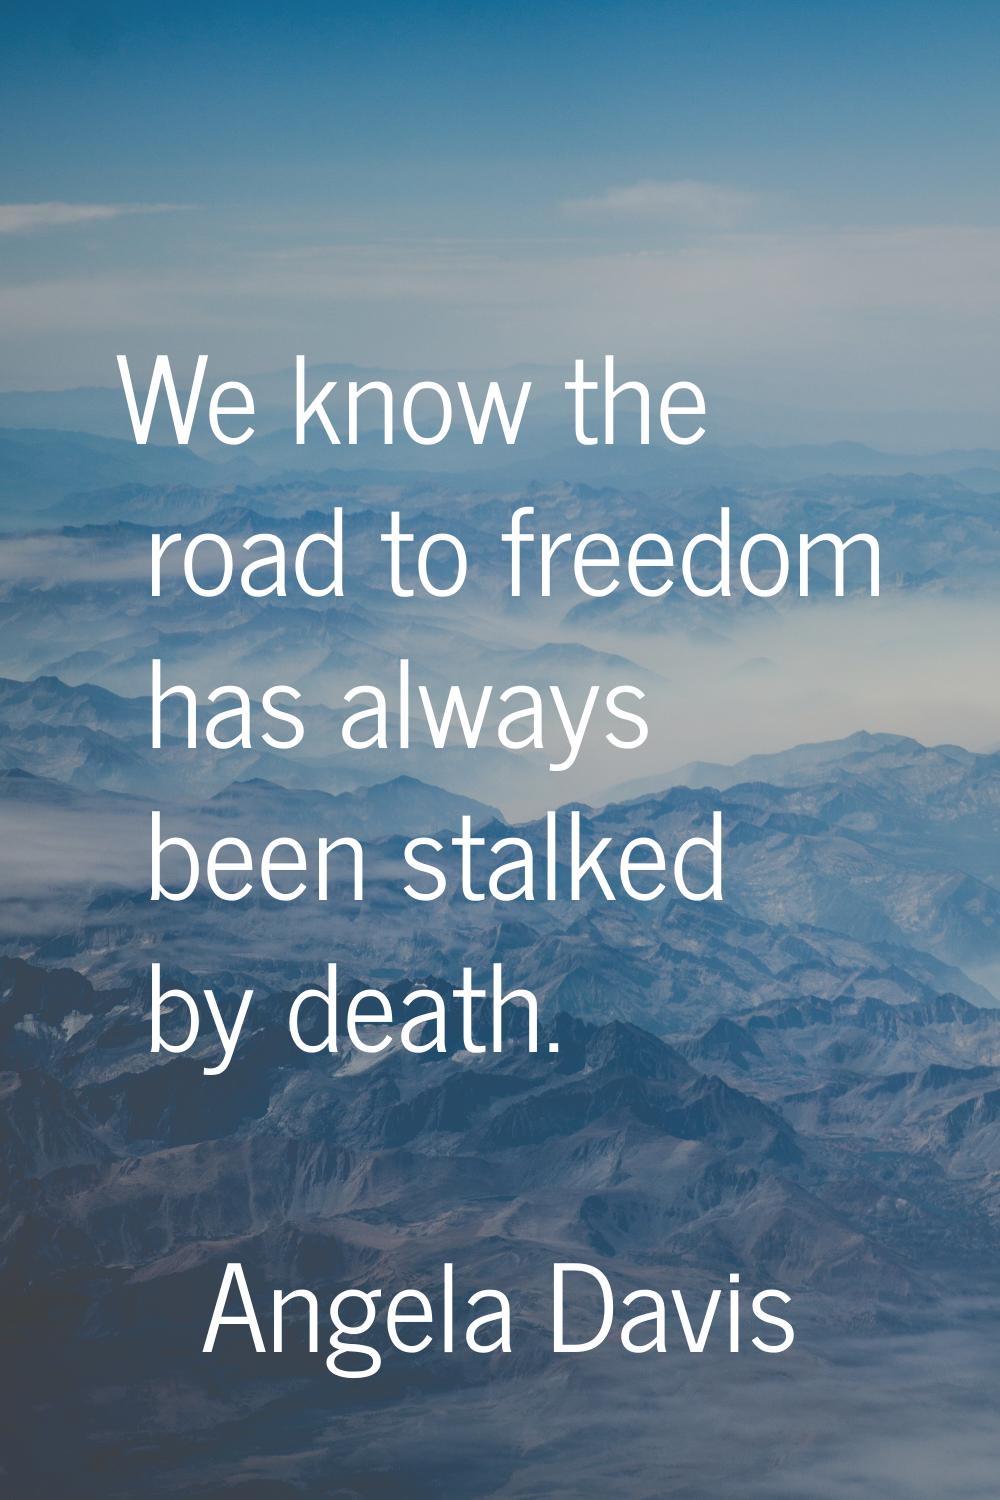 We know the road to freedom has always been stalked by death.